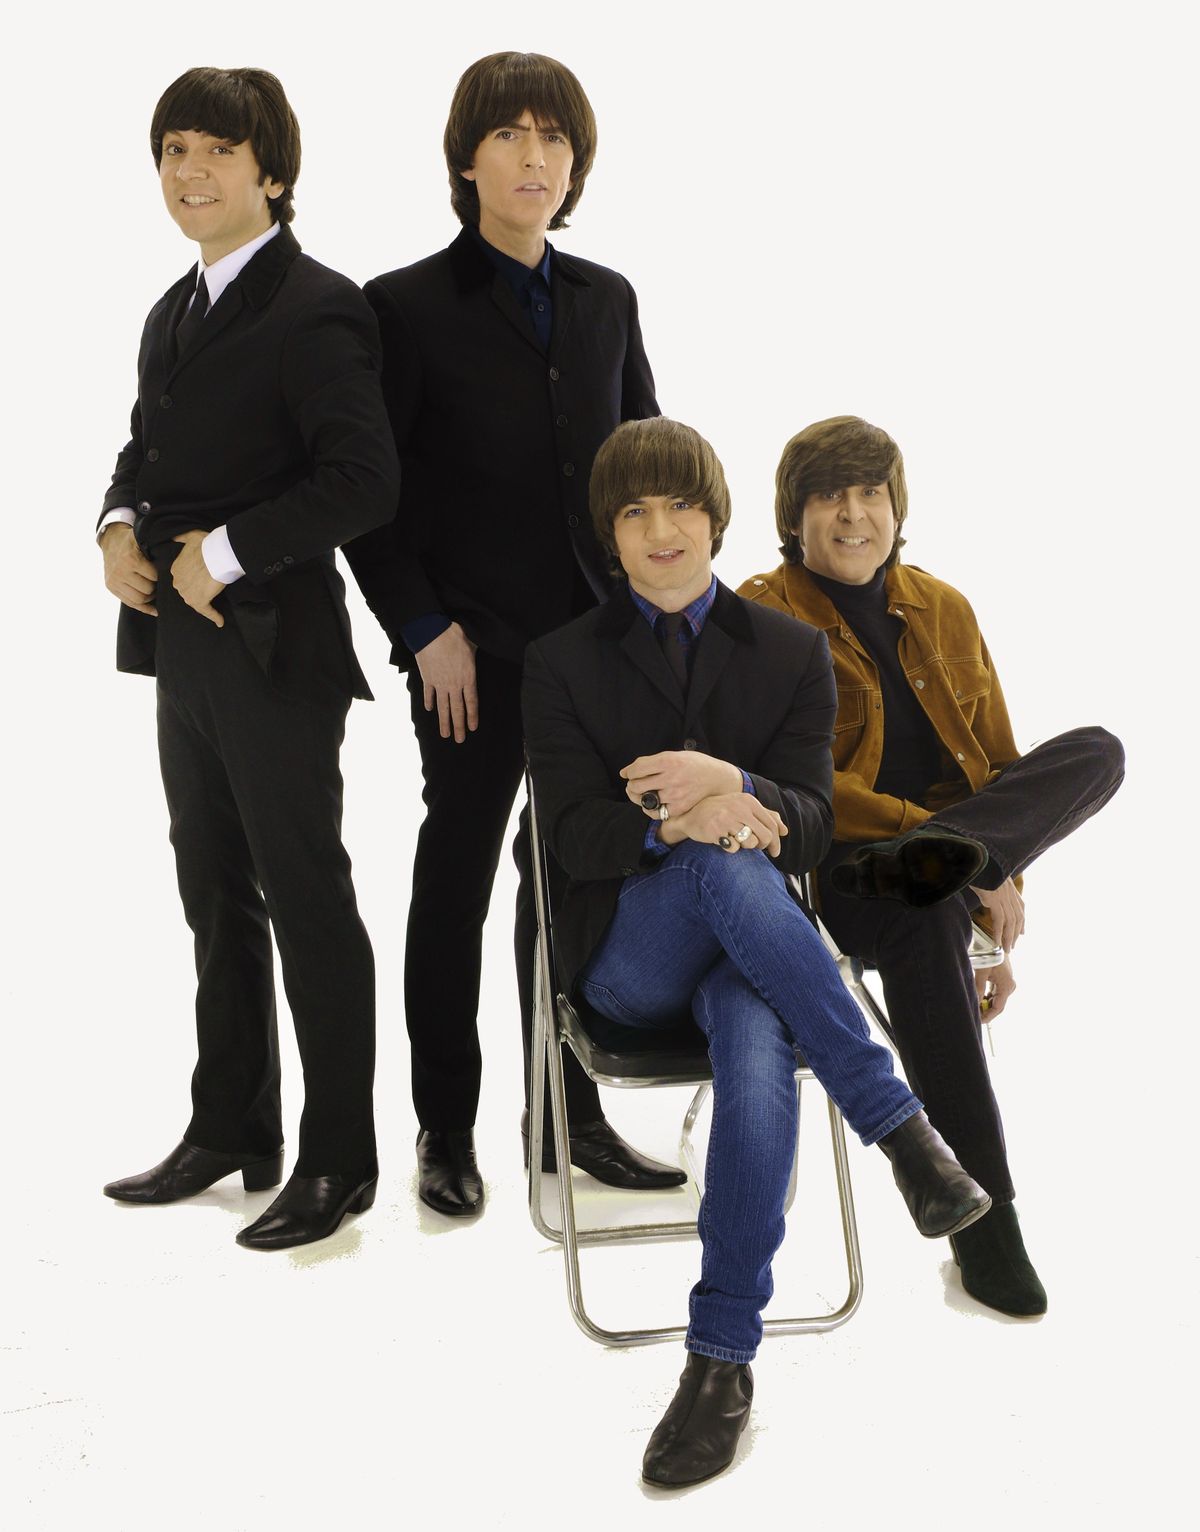 The Fab Four will take the Fox stage this weekend with the Spokane Symphony to play music by the Beatles.